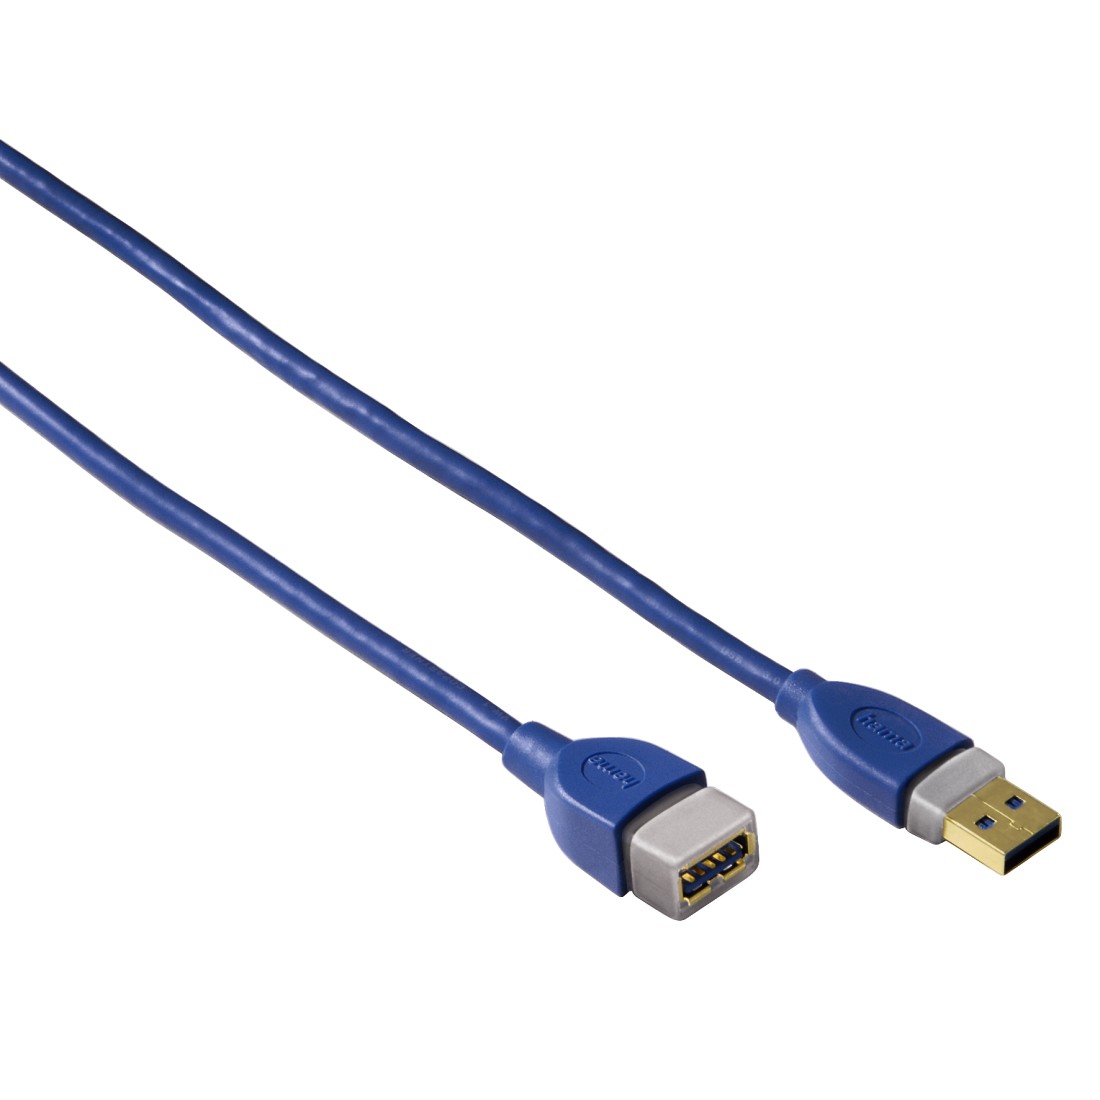 00039675 Hama USB 3.0 Extension Cable, gold-plated, double shielded, 3.00 m  | hama.com